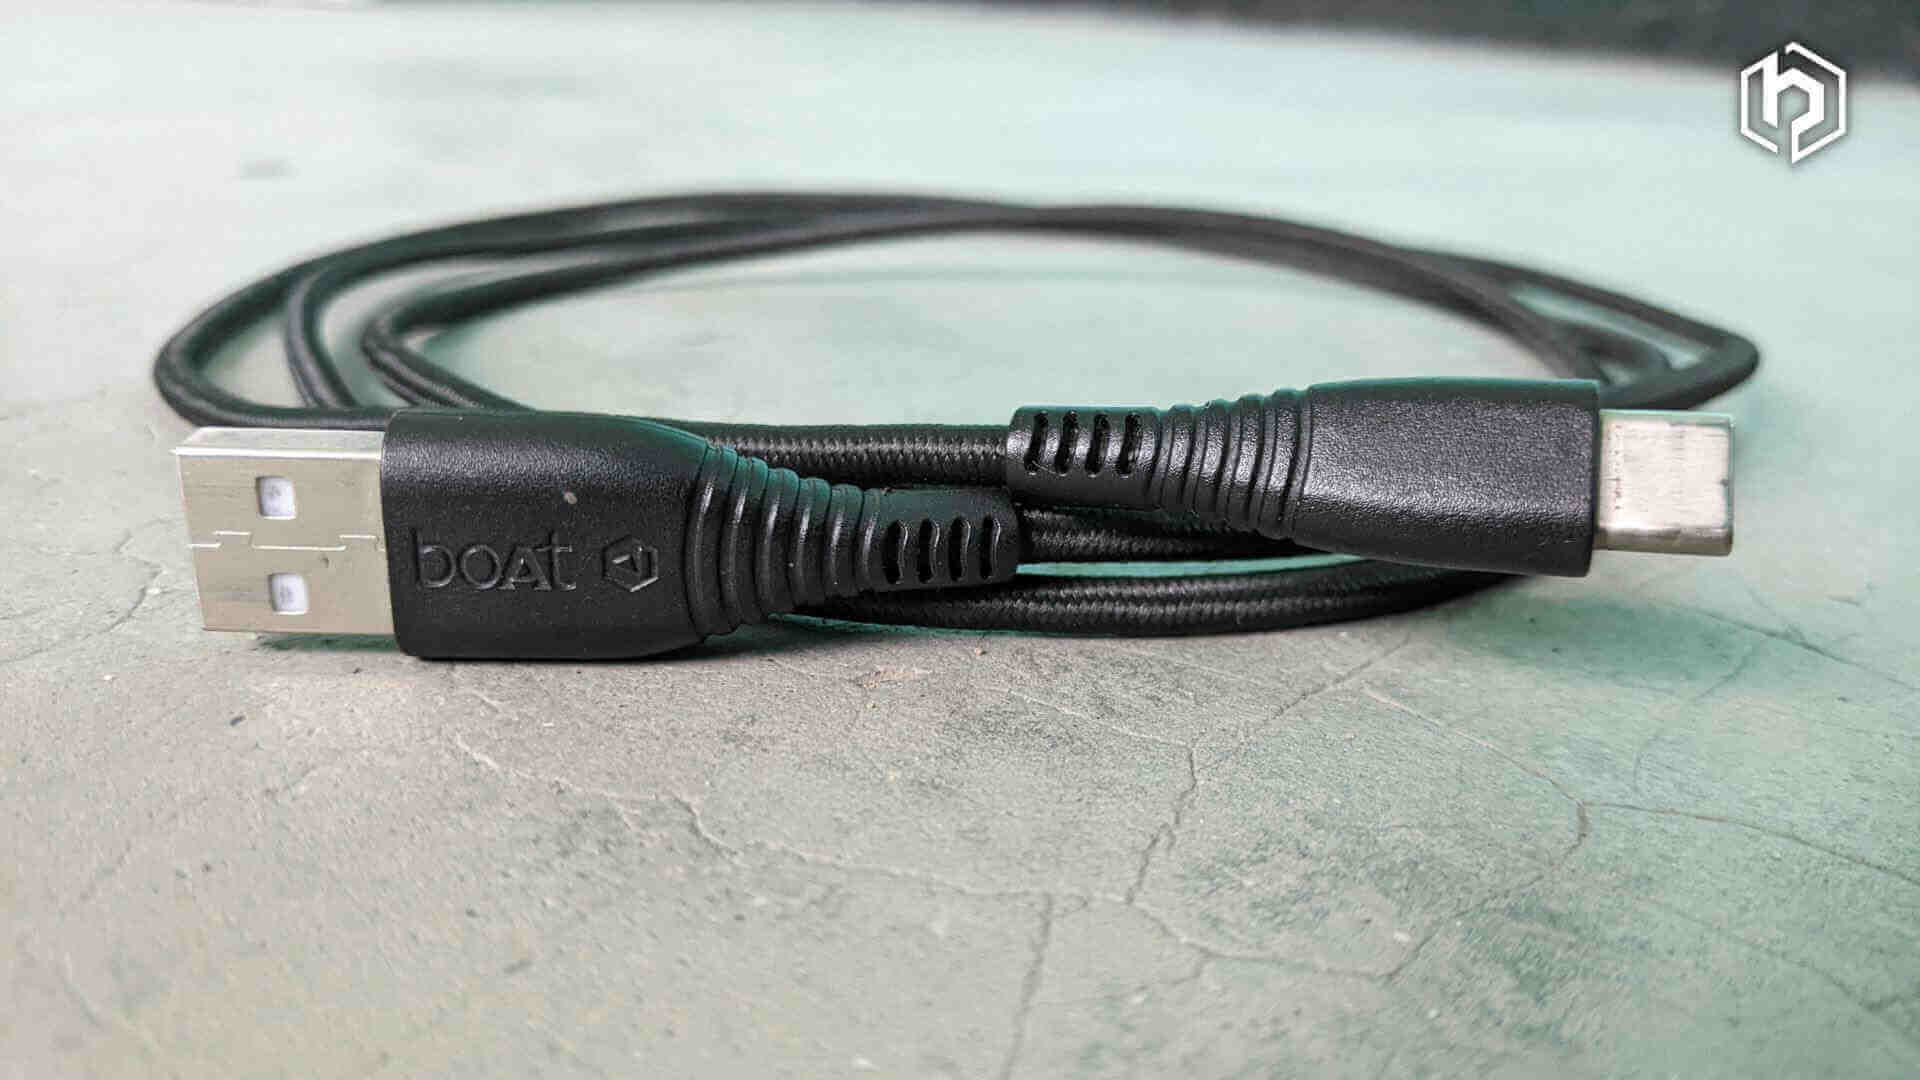 Is boAt Data Cable Good